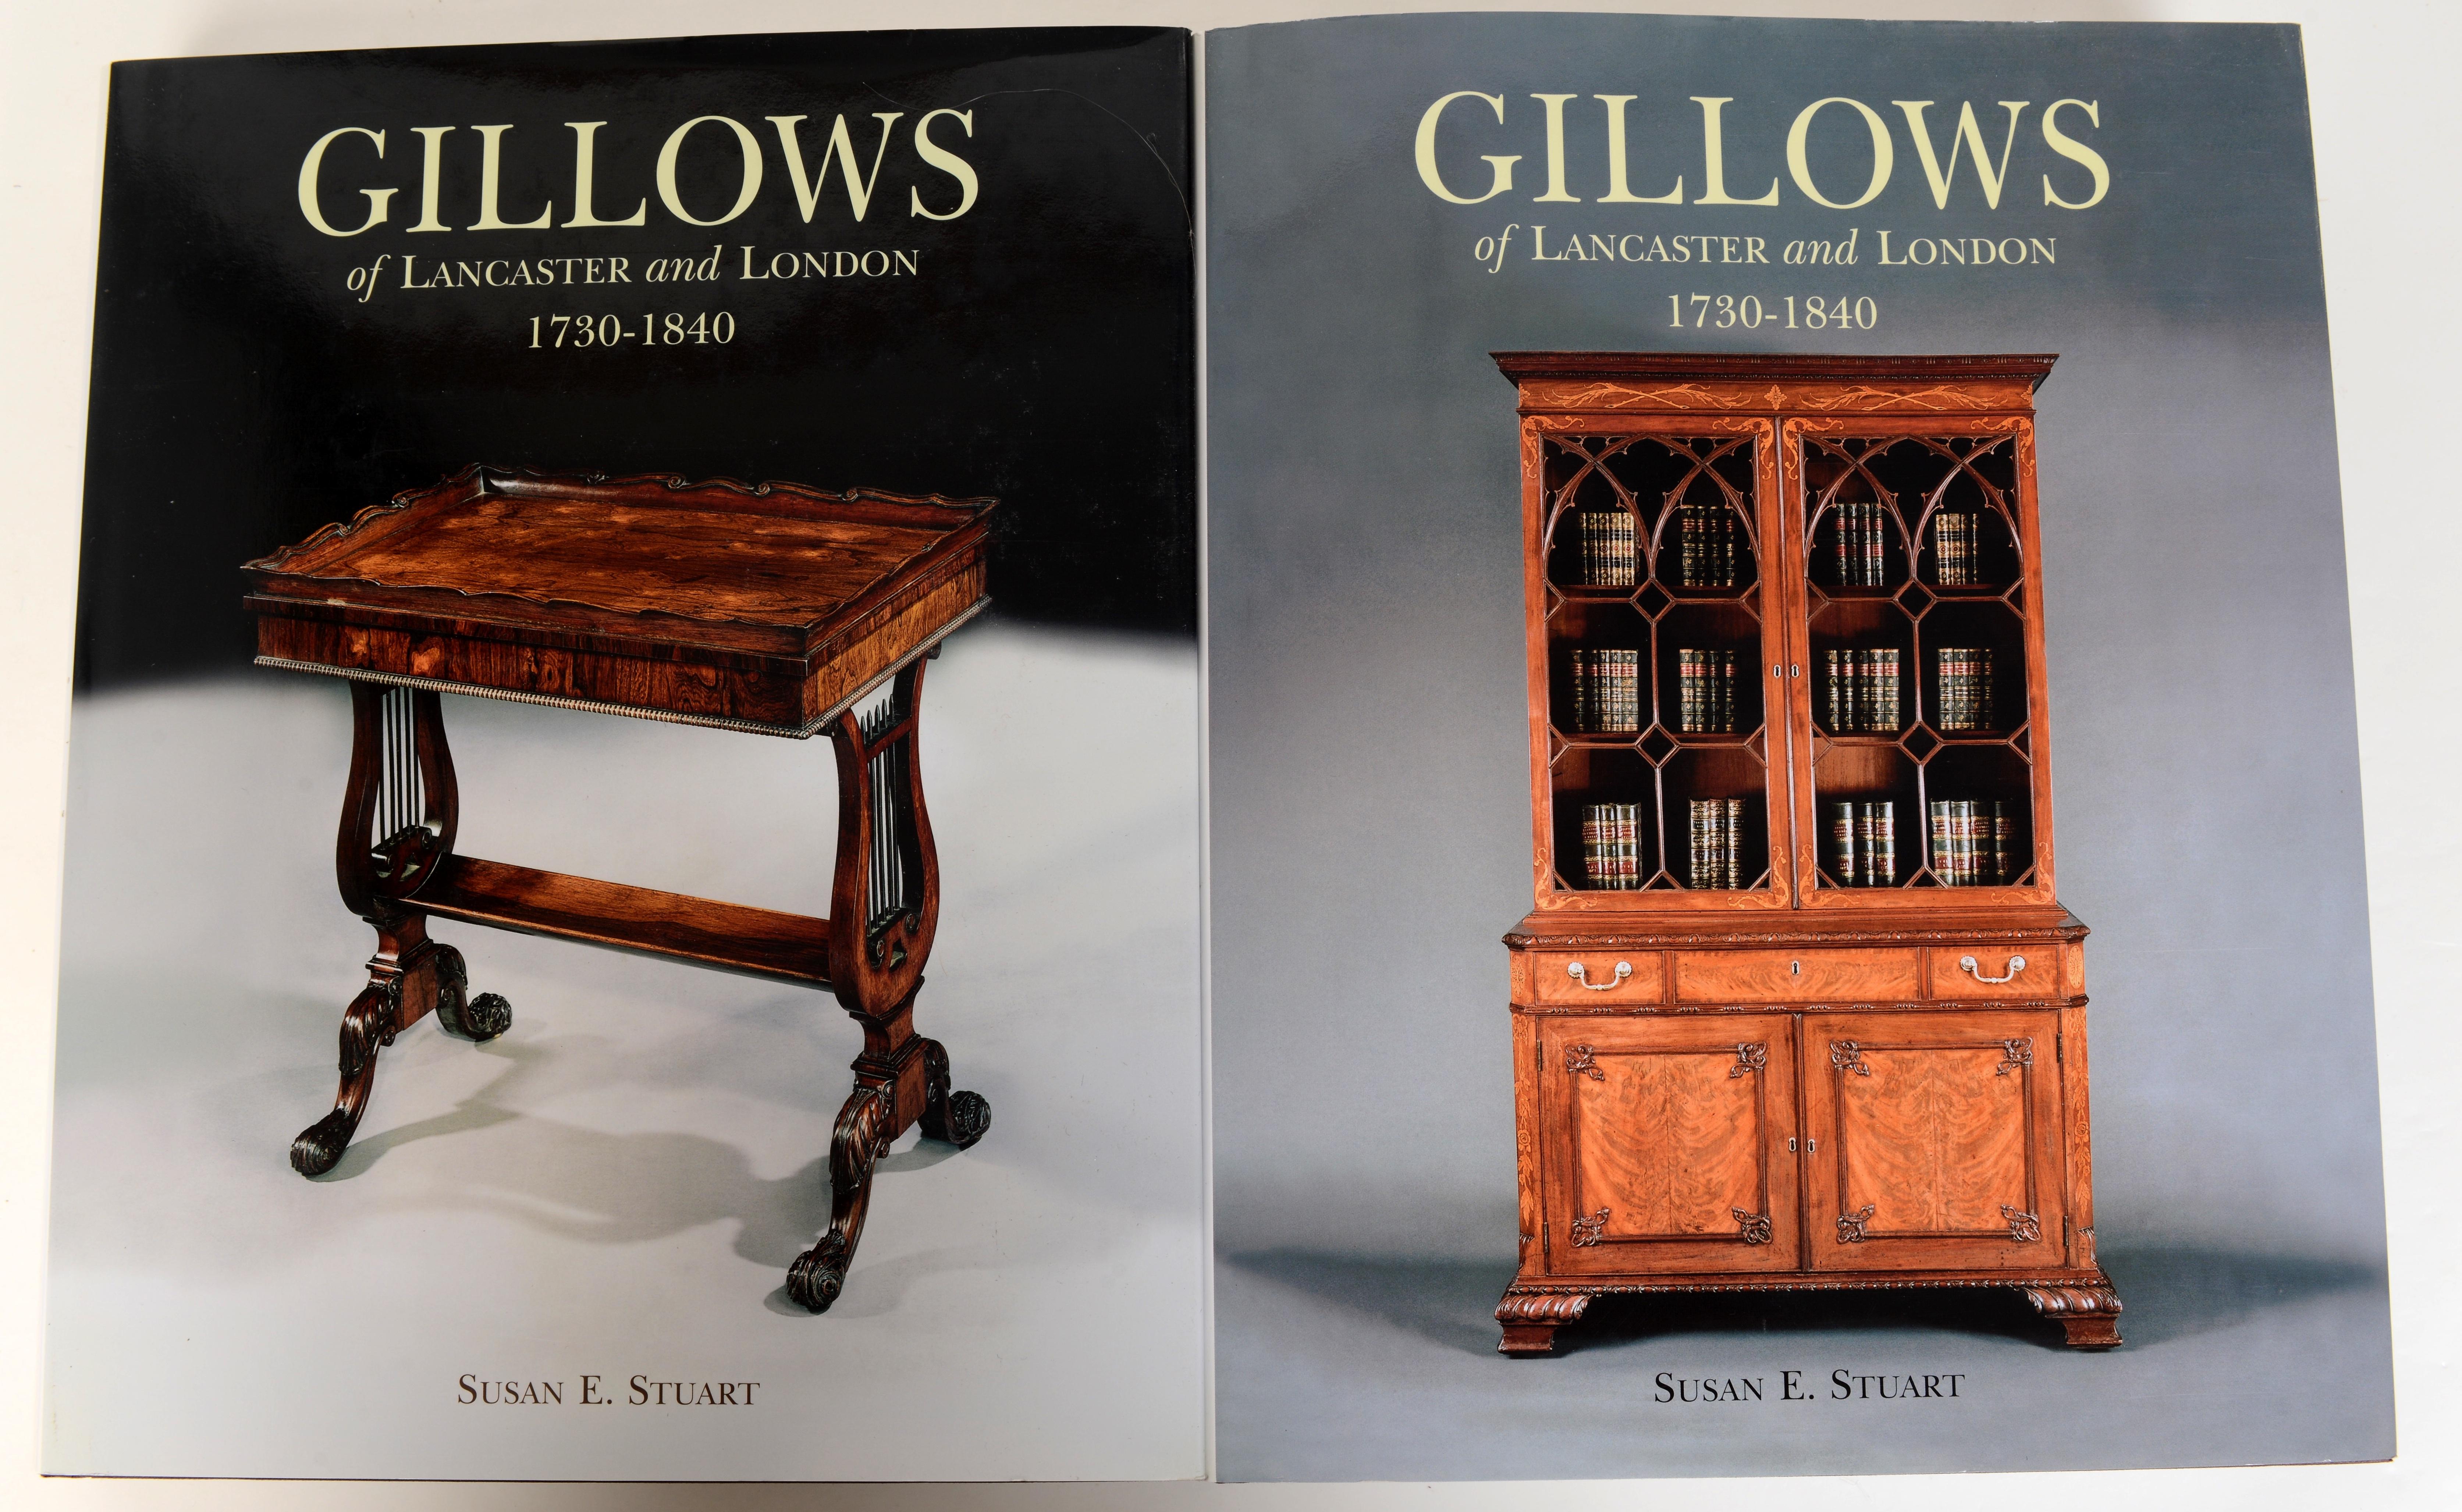 Gillows: of Lancaster and London 1730-1840, Cabinetmakers and International Merchants : A Furniture and Business History, by Susan E. Stuart. Rare 1st Ed 2 Volume Boxed Set, now out of print. Published by The Antique Collectors' Club, Woodbridge,